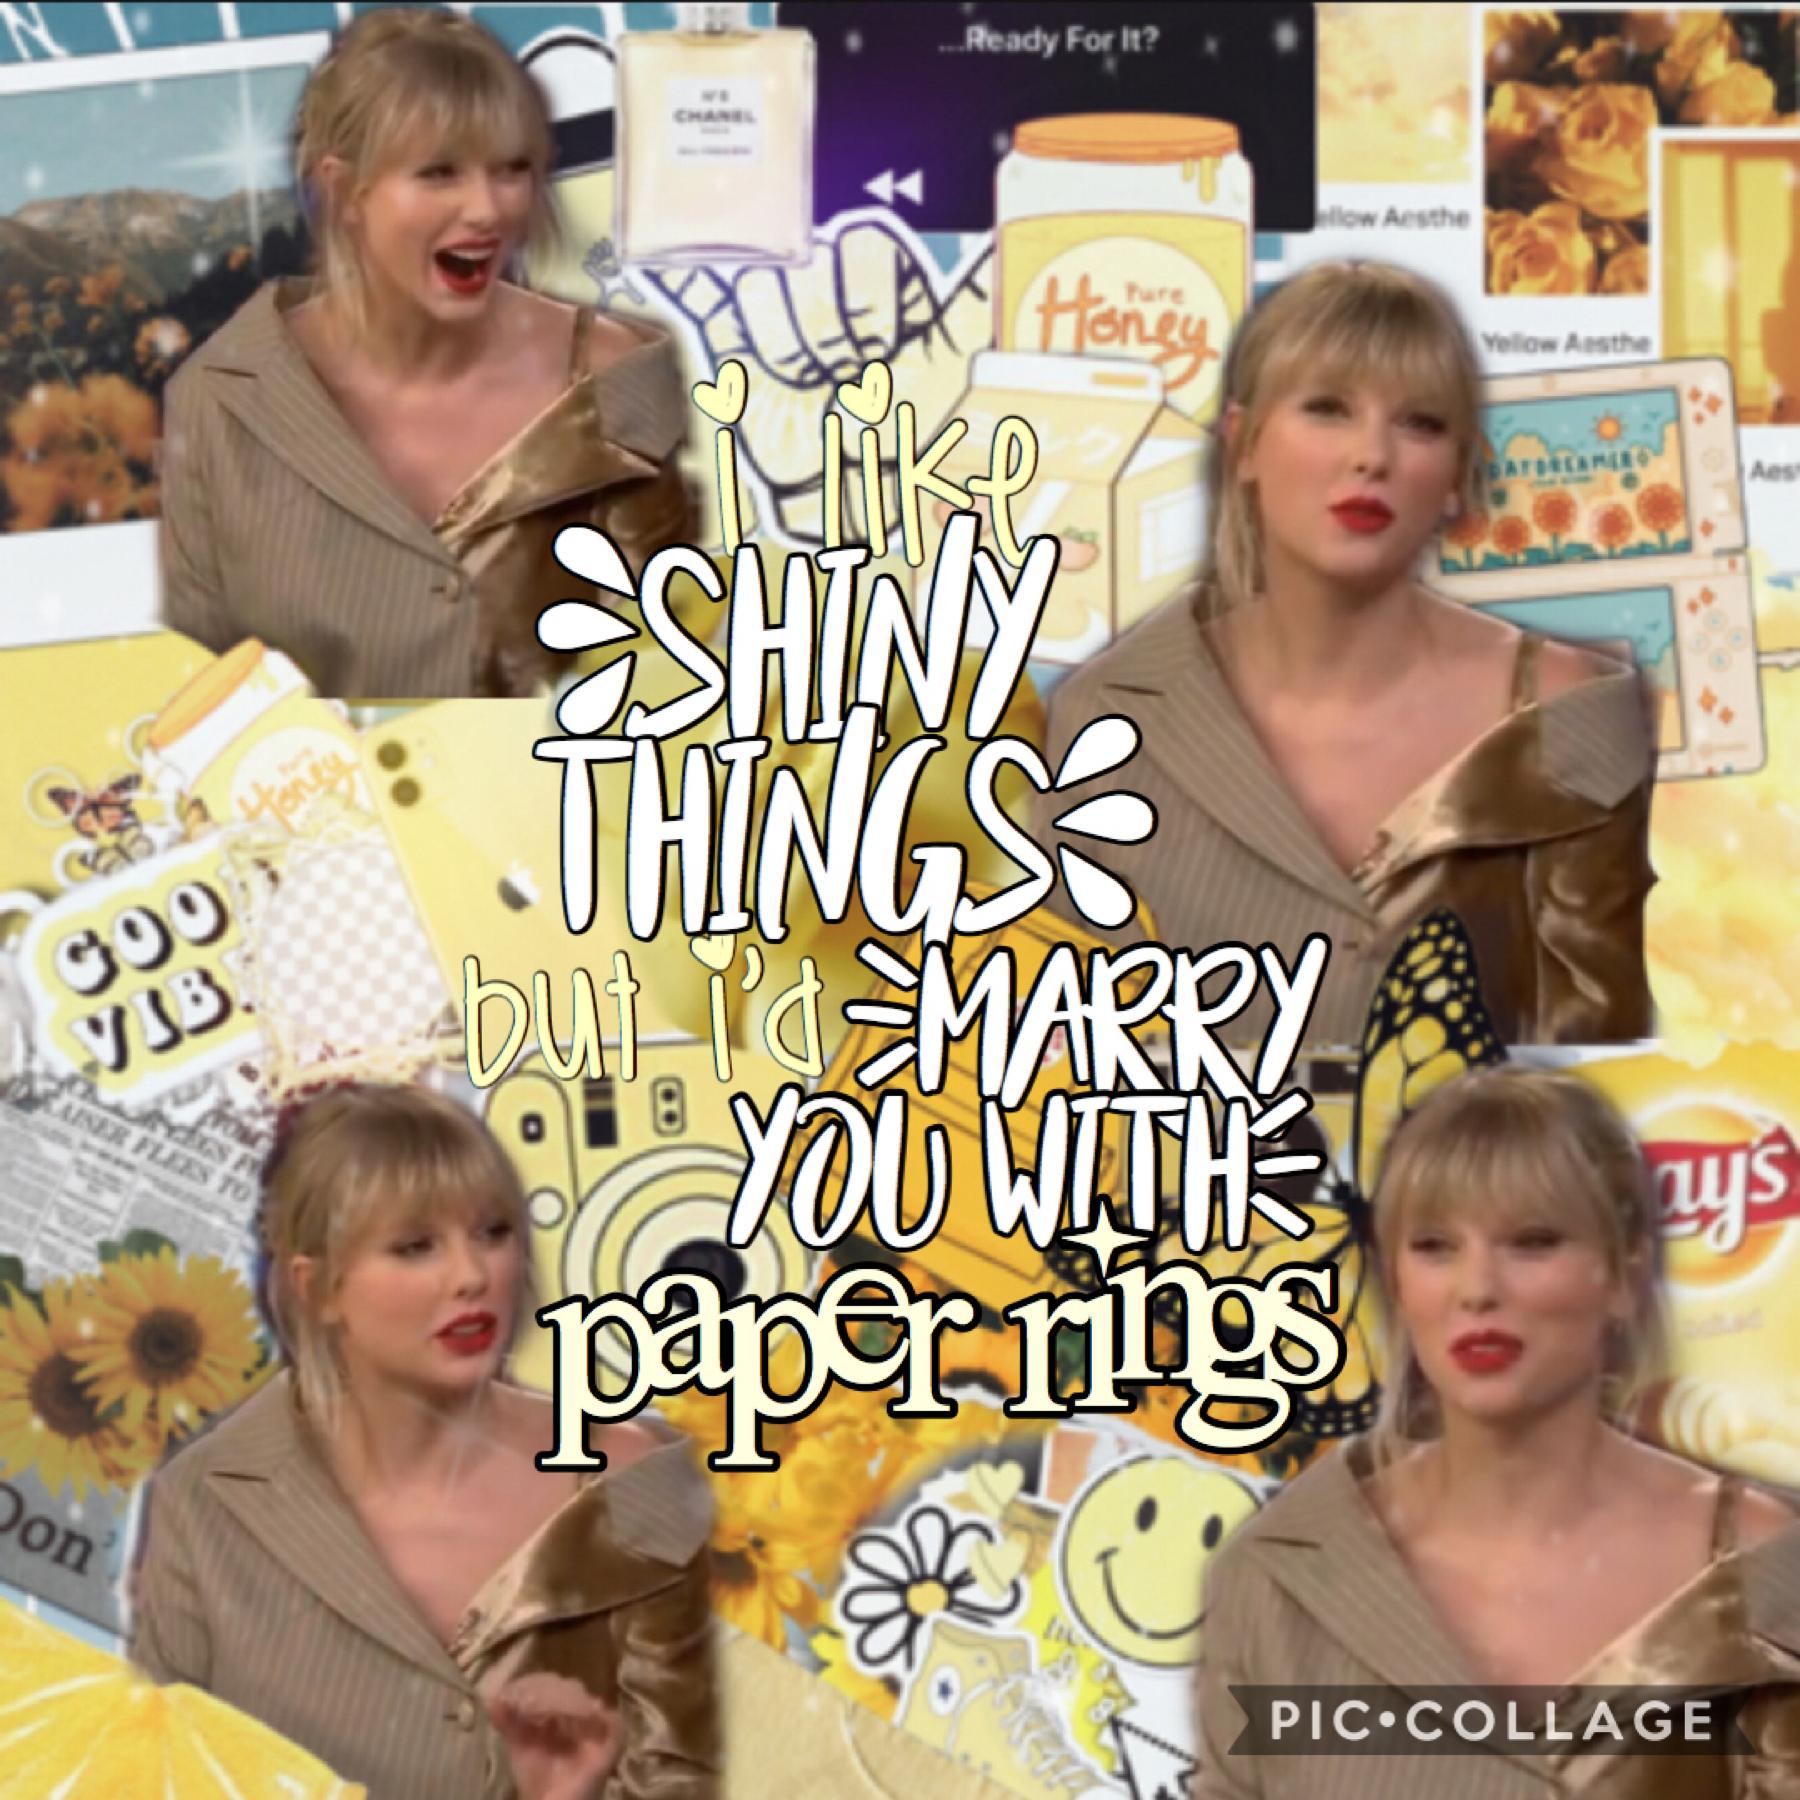 Tap⚡️
Taylor collage!